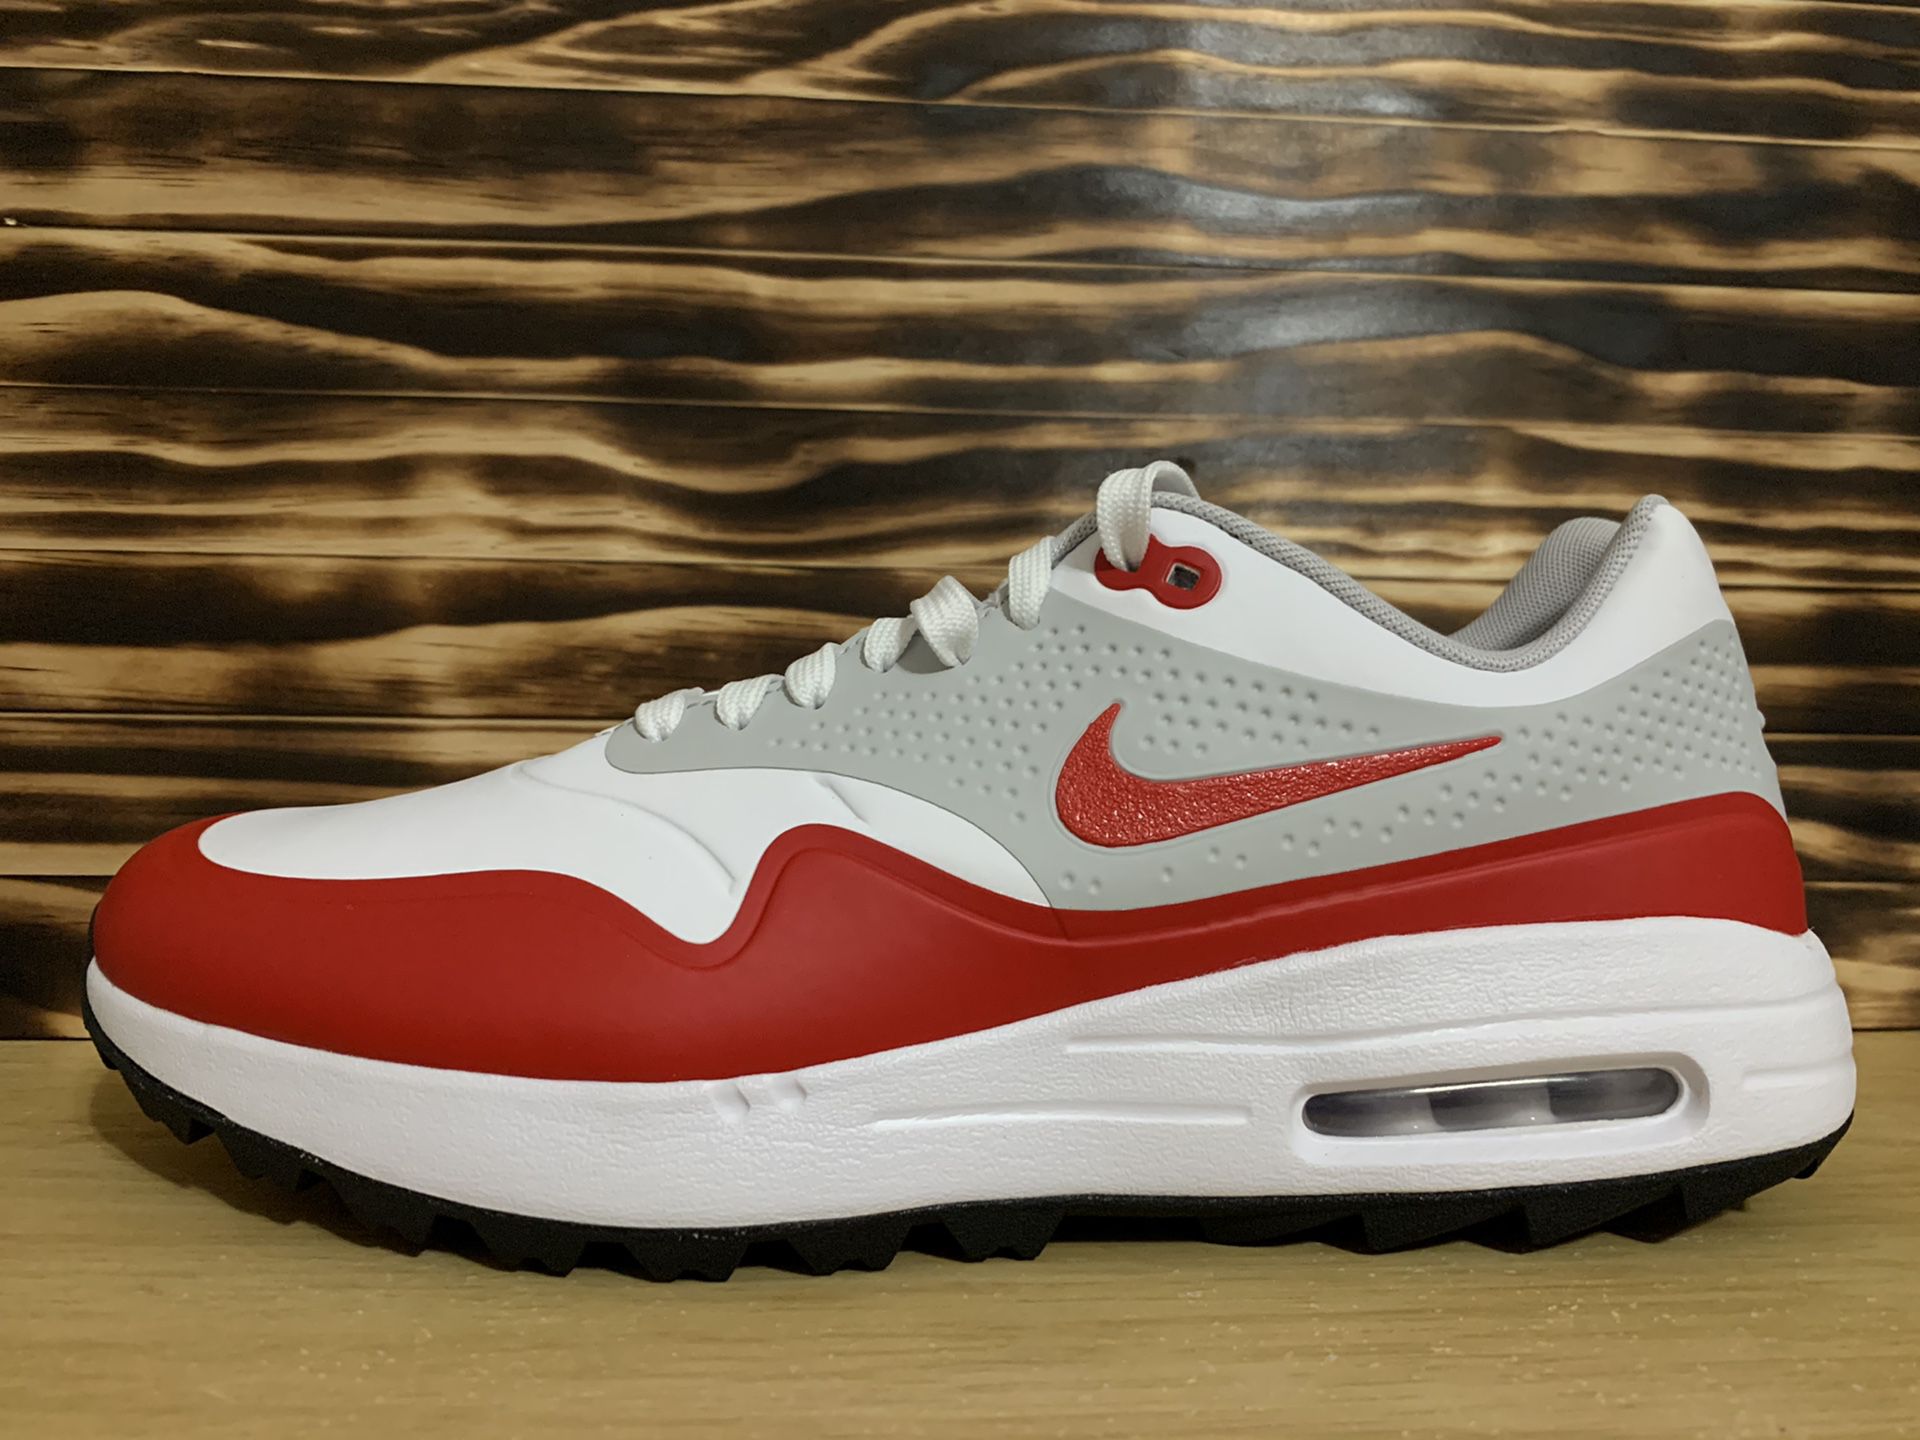 Nike Air Max 1 G “University Red” AQ0863-100 Men’s Size 9.5 Golf Shoes